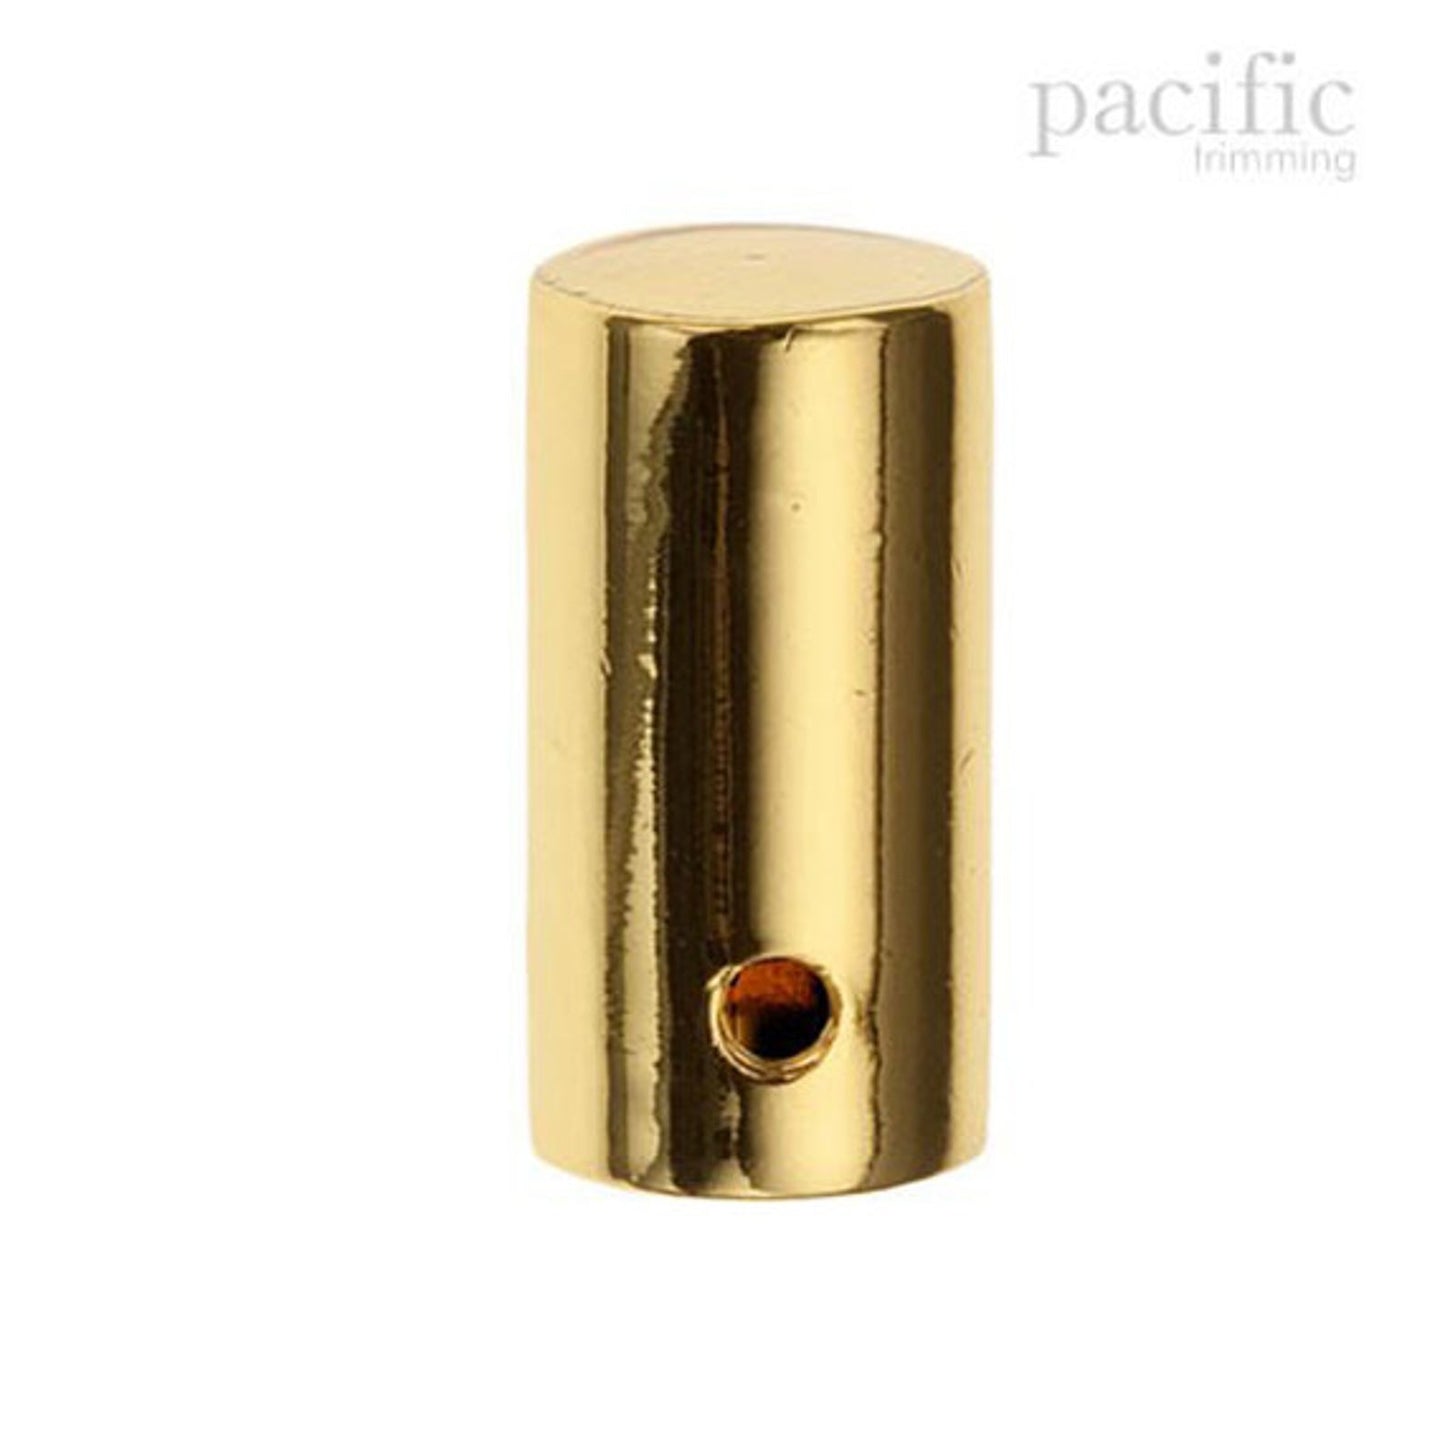 7mm Metal Cord End Gold